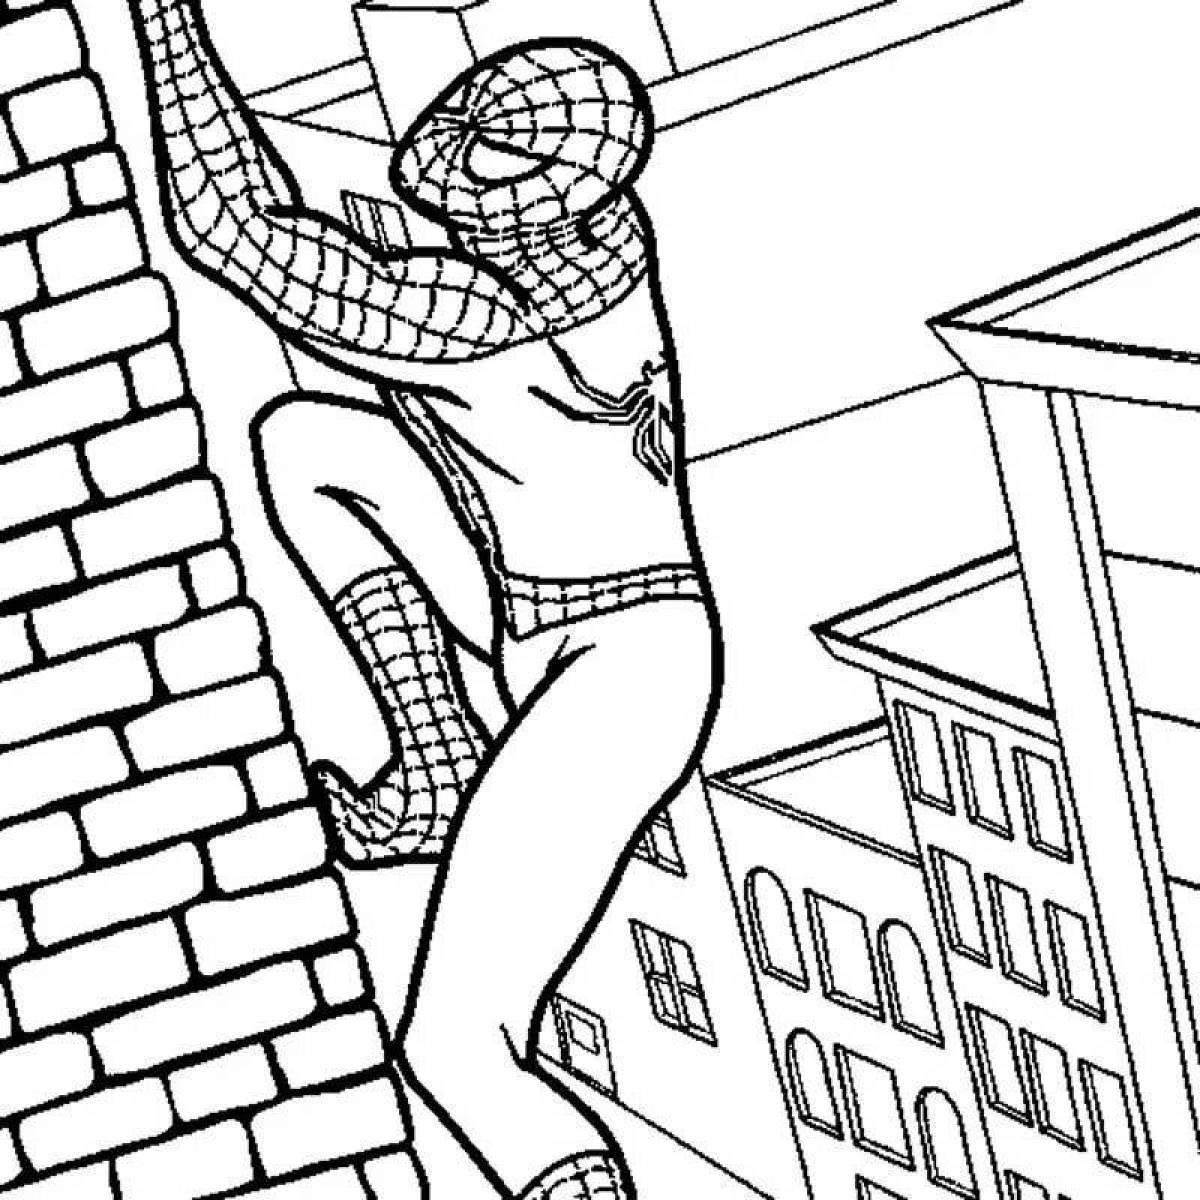 Joyful spider-man coloring for children 5 years old